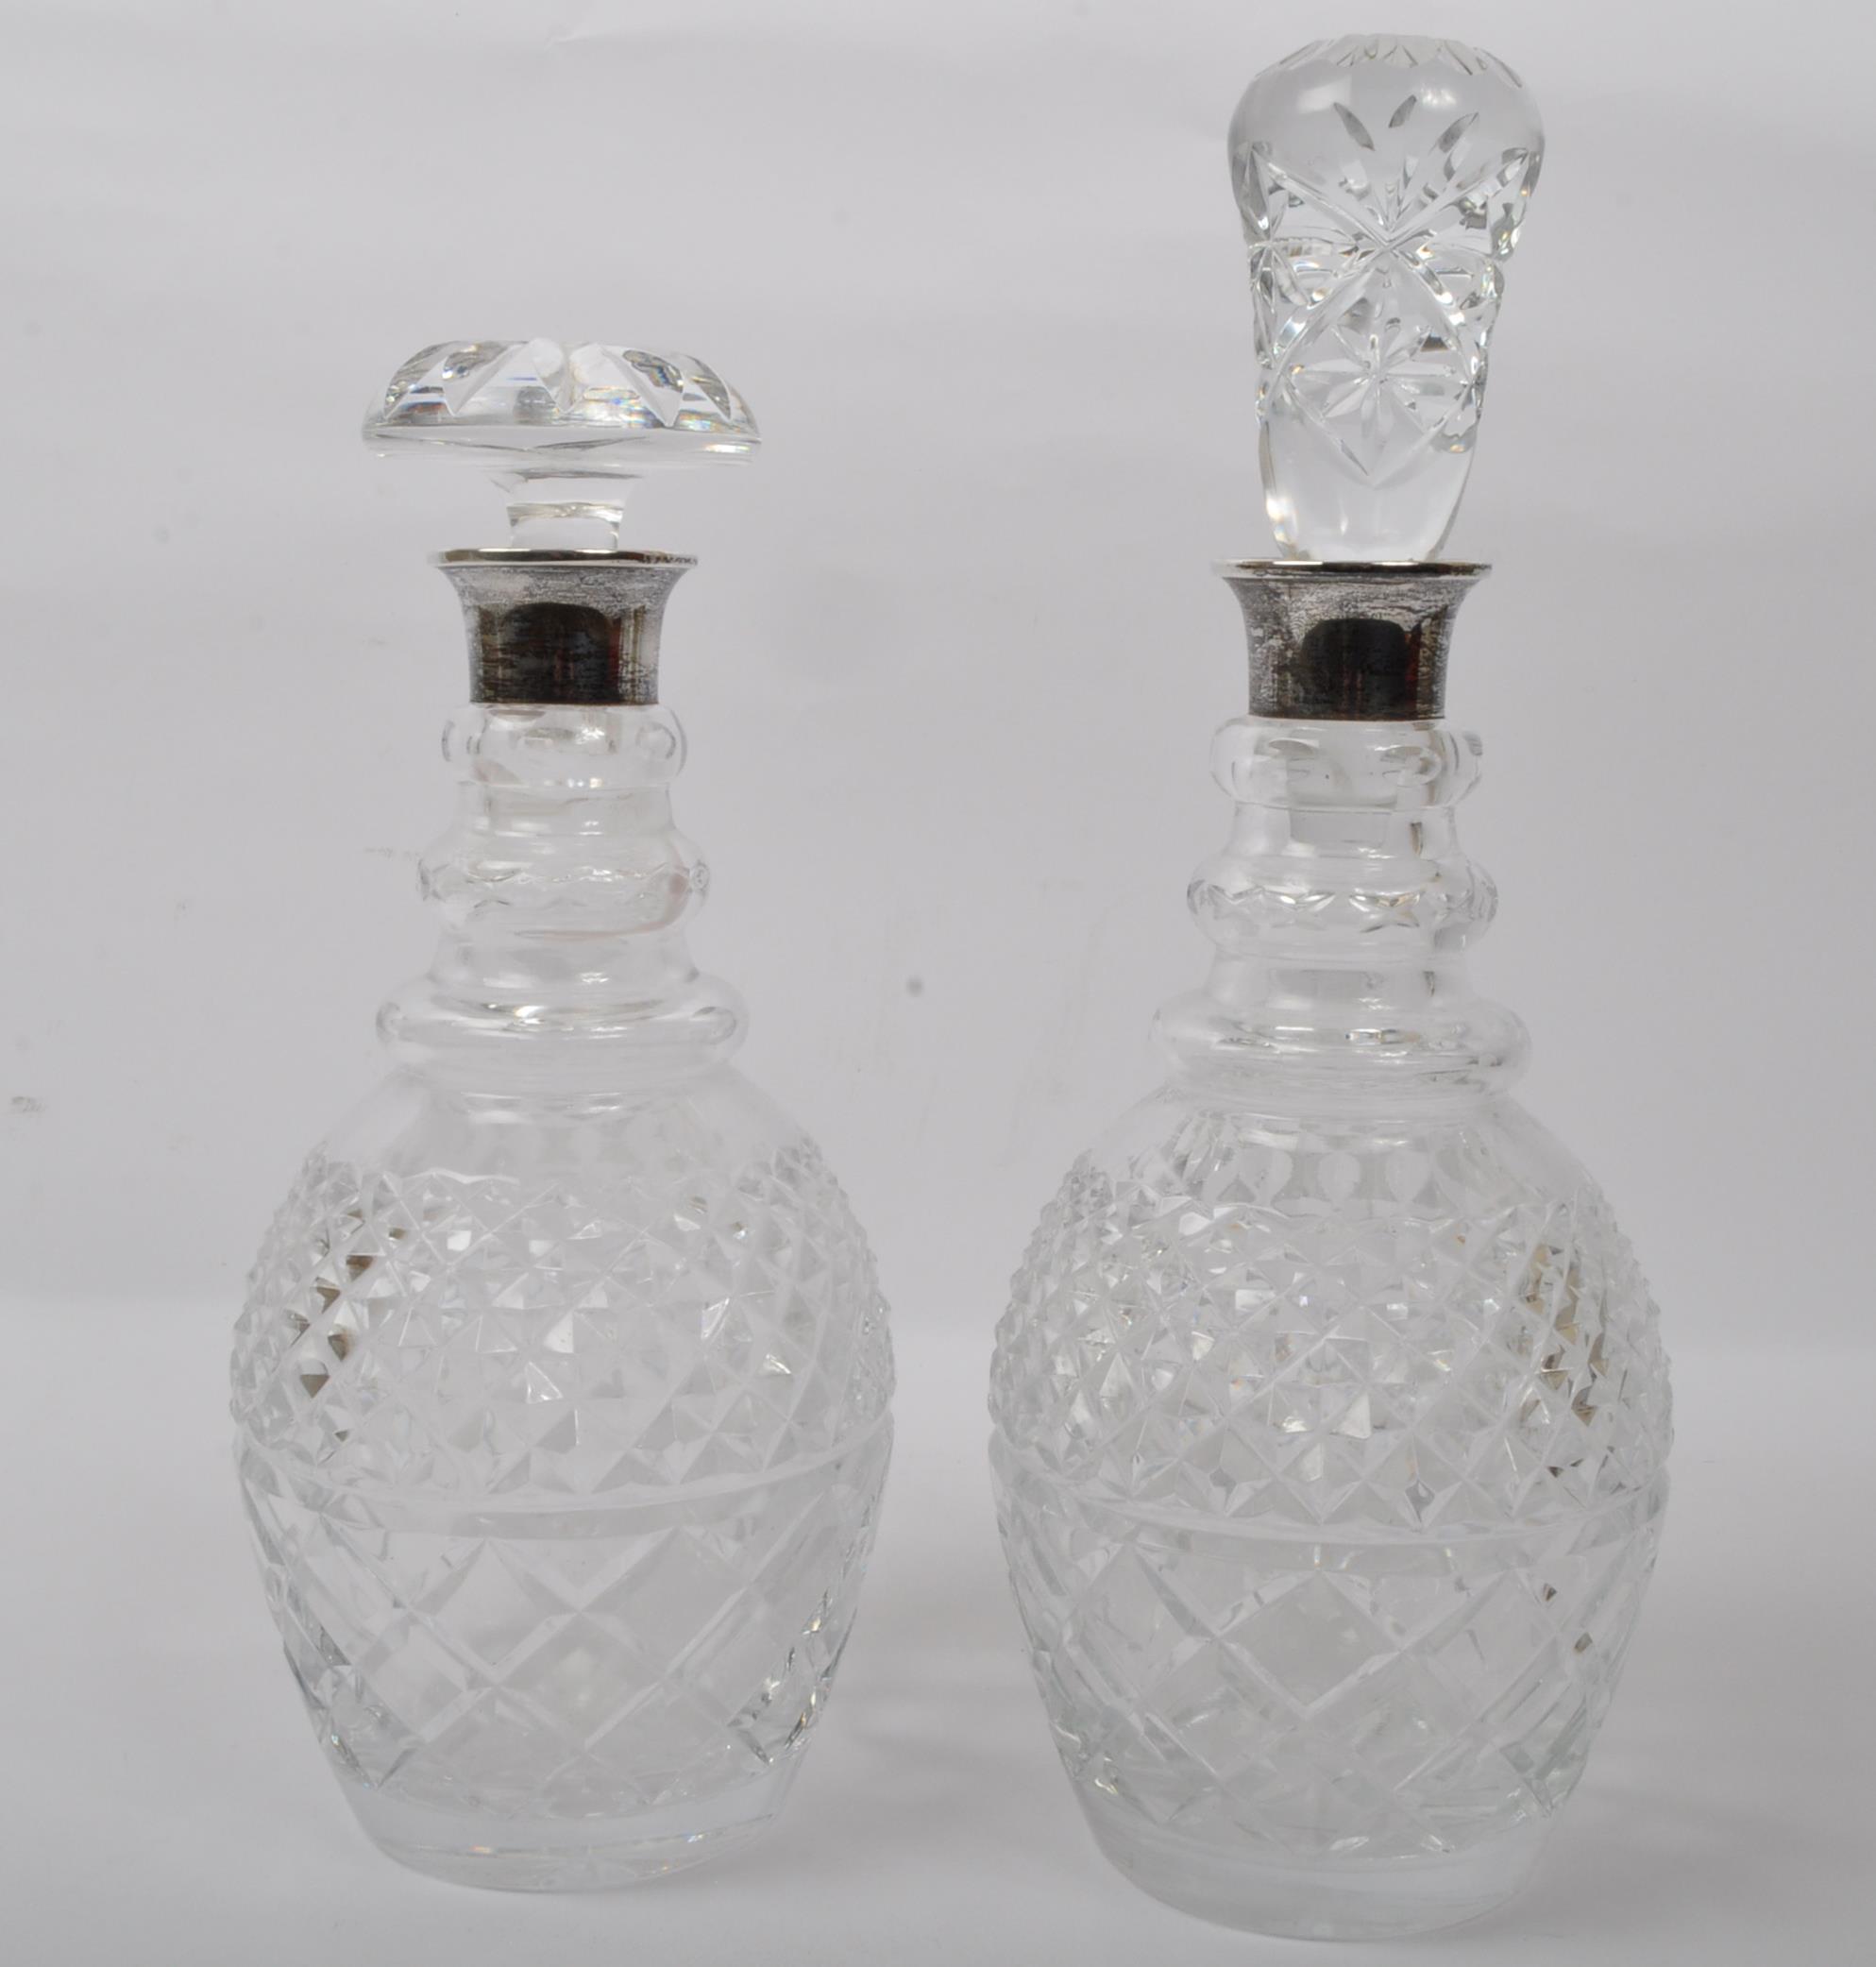 EIGHT LARGE VINTAGE CUT GLASS DECANTERS - Image 4 of 6